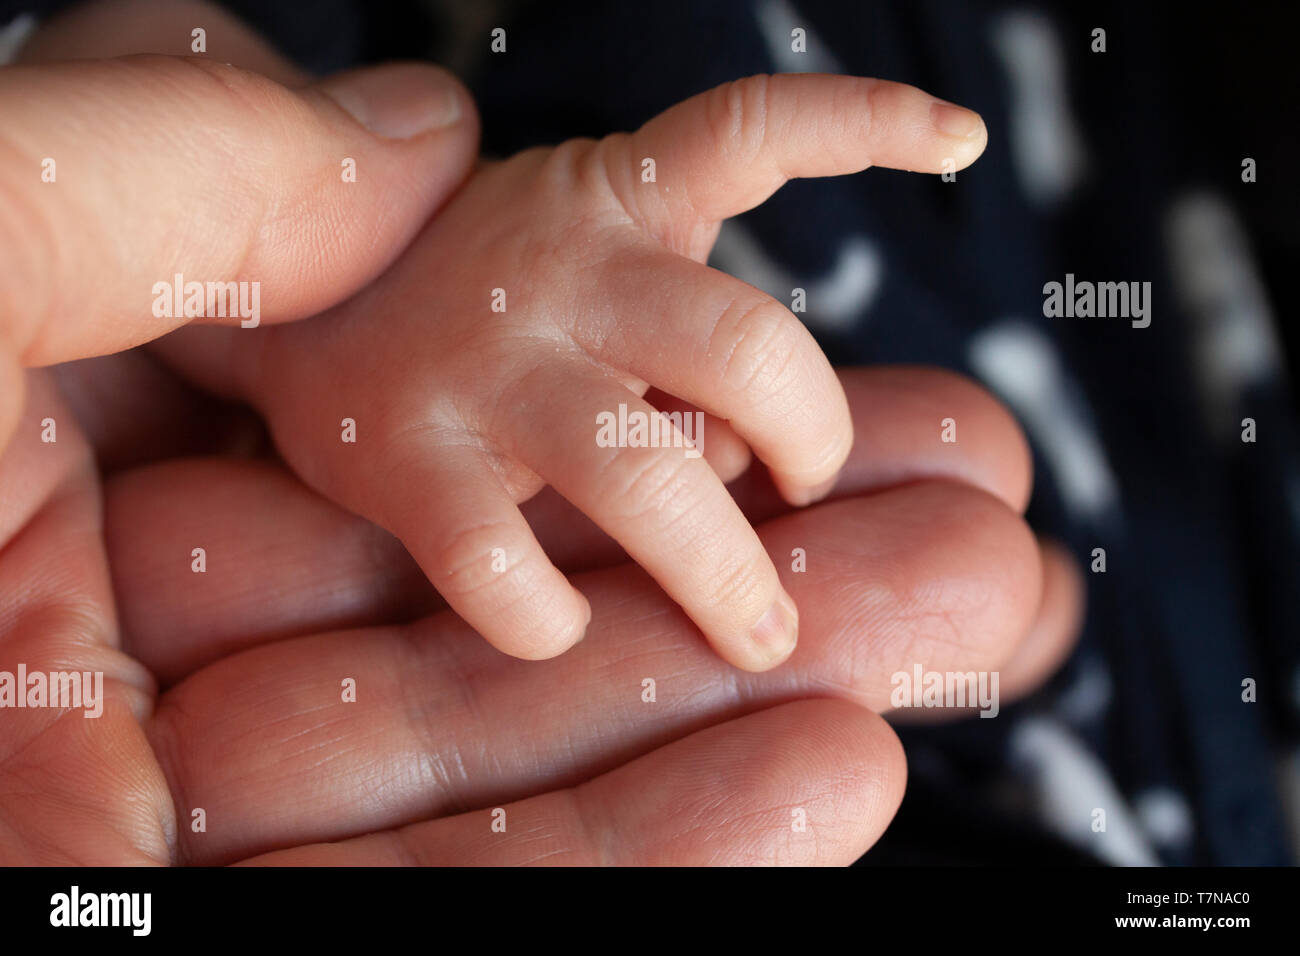 Father holding a newborn baby hand in his. Child hand closeup into parent hands together. Stock Photo